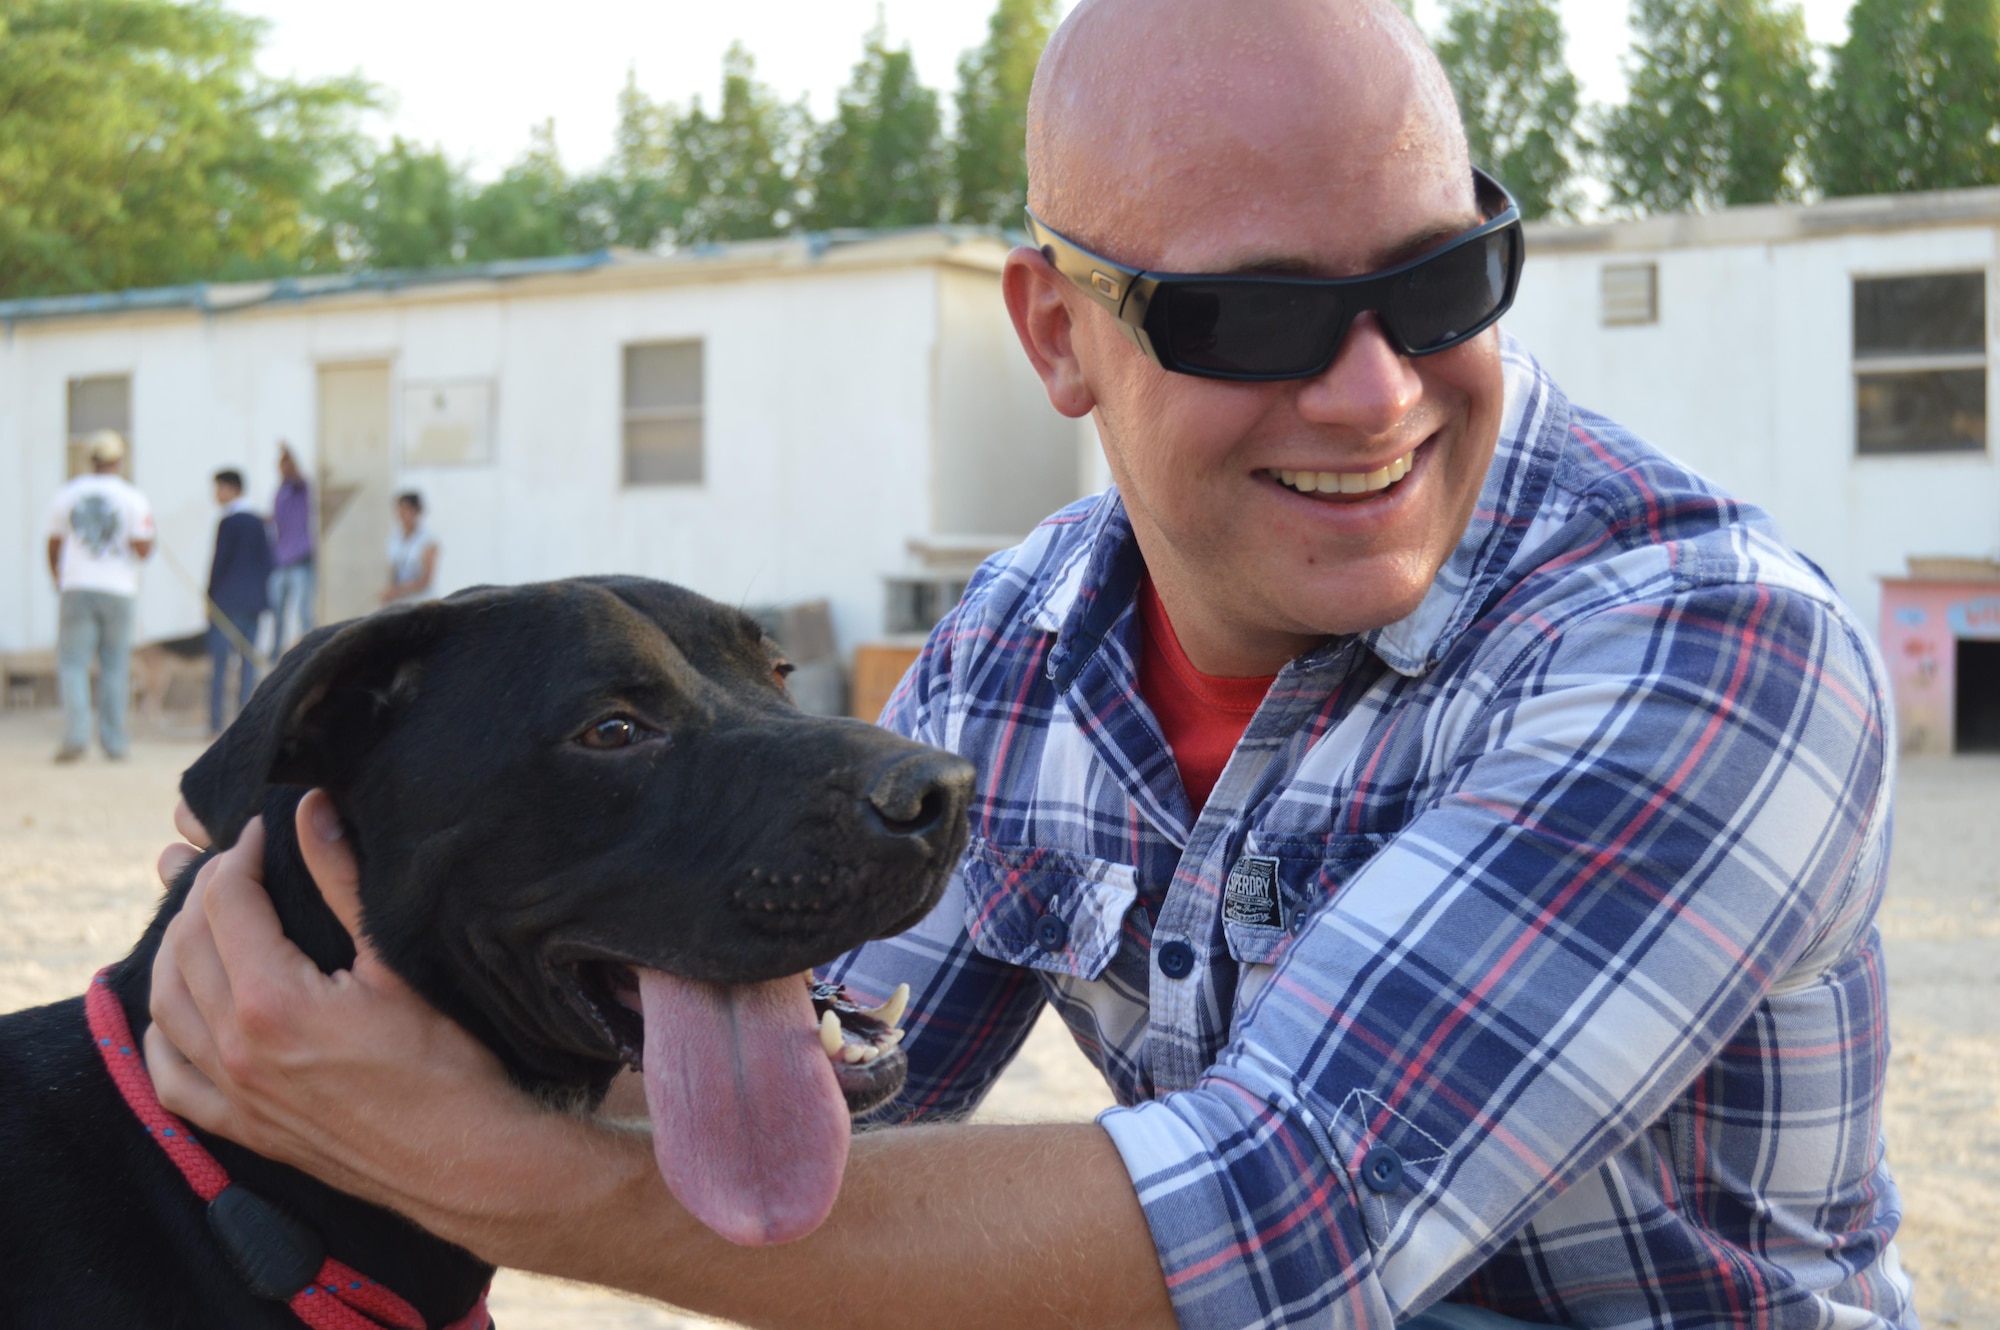 Senior Airman Jesse Garrett, 379 Expeditionary Civil Engineer Squadron Fire Department, shares some quality time with one of the rescue K-9’s at Qatar Animal Welfare Society (Q.A.W.S) August 15, 2015 Ar-Rayyan, Qatar. The establishment has served as a Doha refuge for abandoned animals since 2003. (U.S. Air Force photo by Senior Airman Alexandria Bandin/Released)